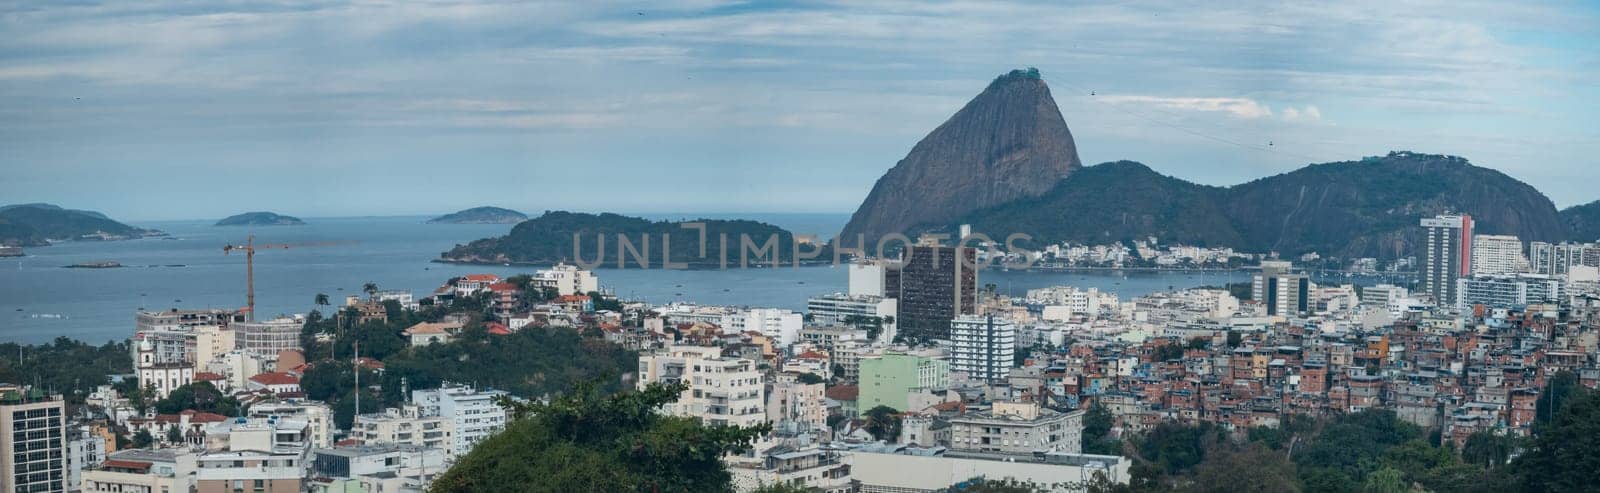 Panoramic View of Rio de Janeiro Bay from Botafogo with Sugarloaf Mountain by FerradalFCG